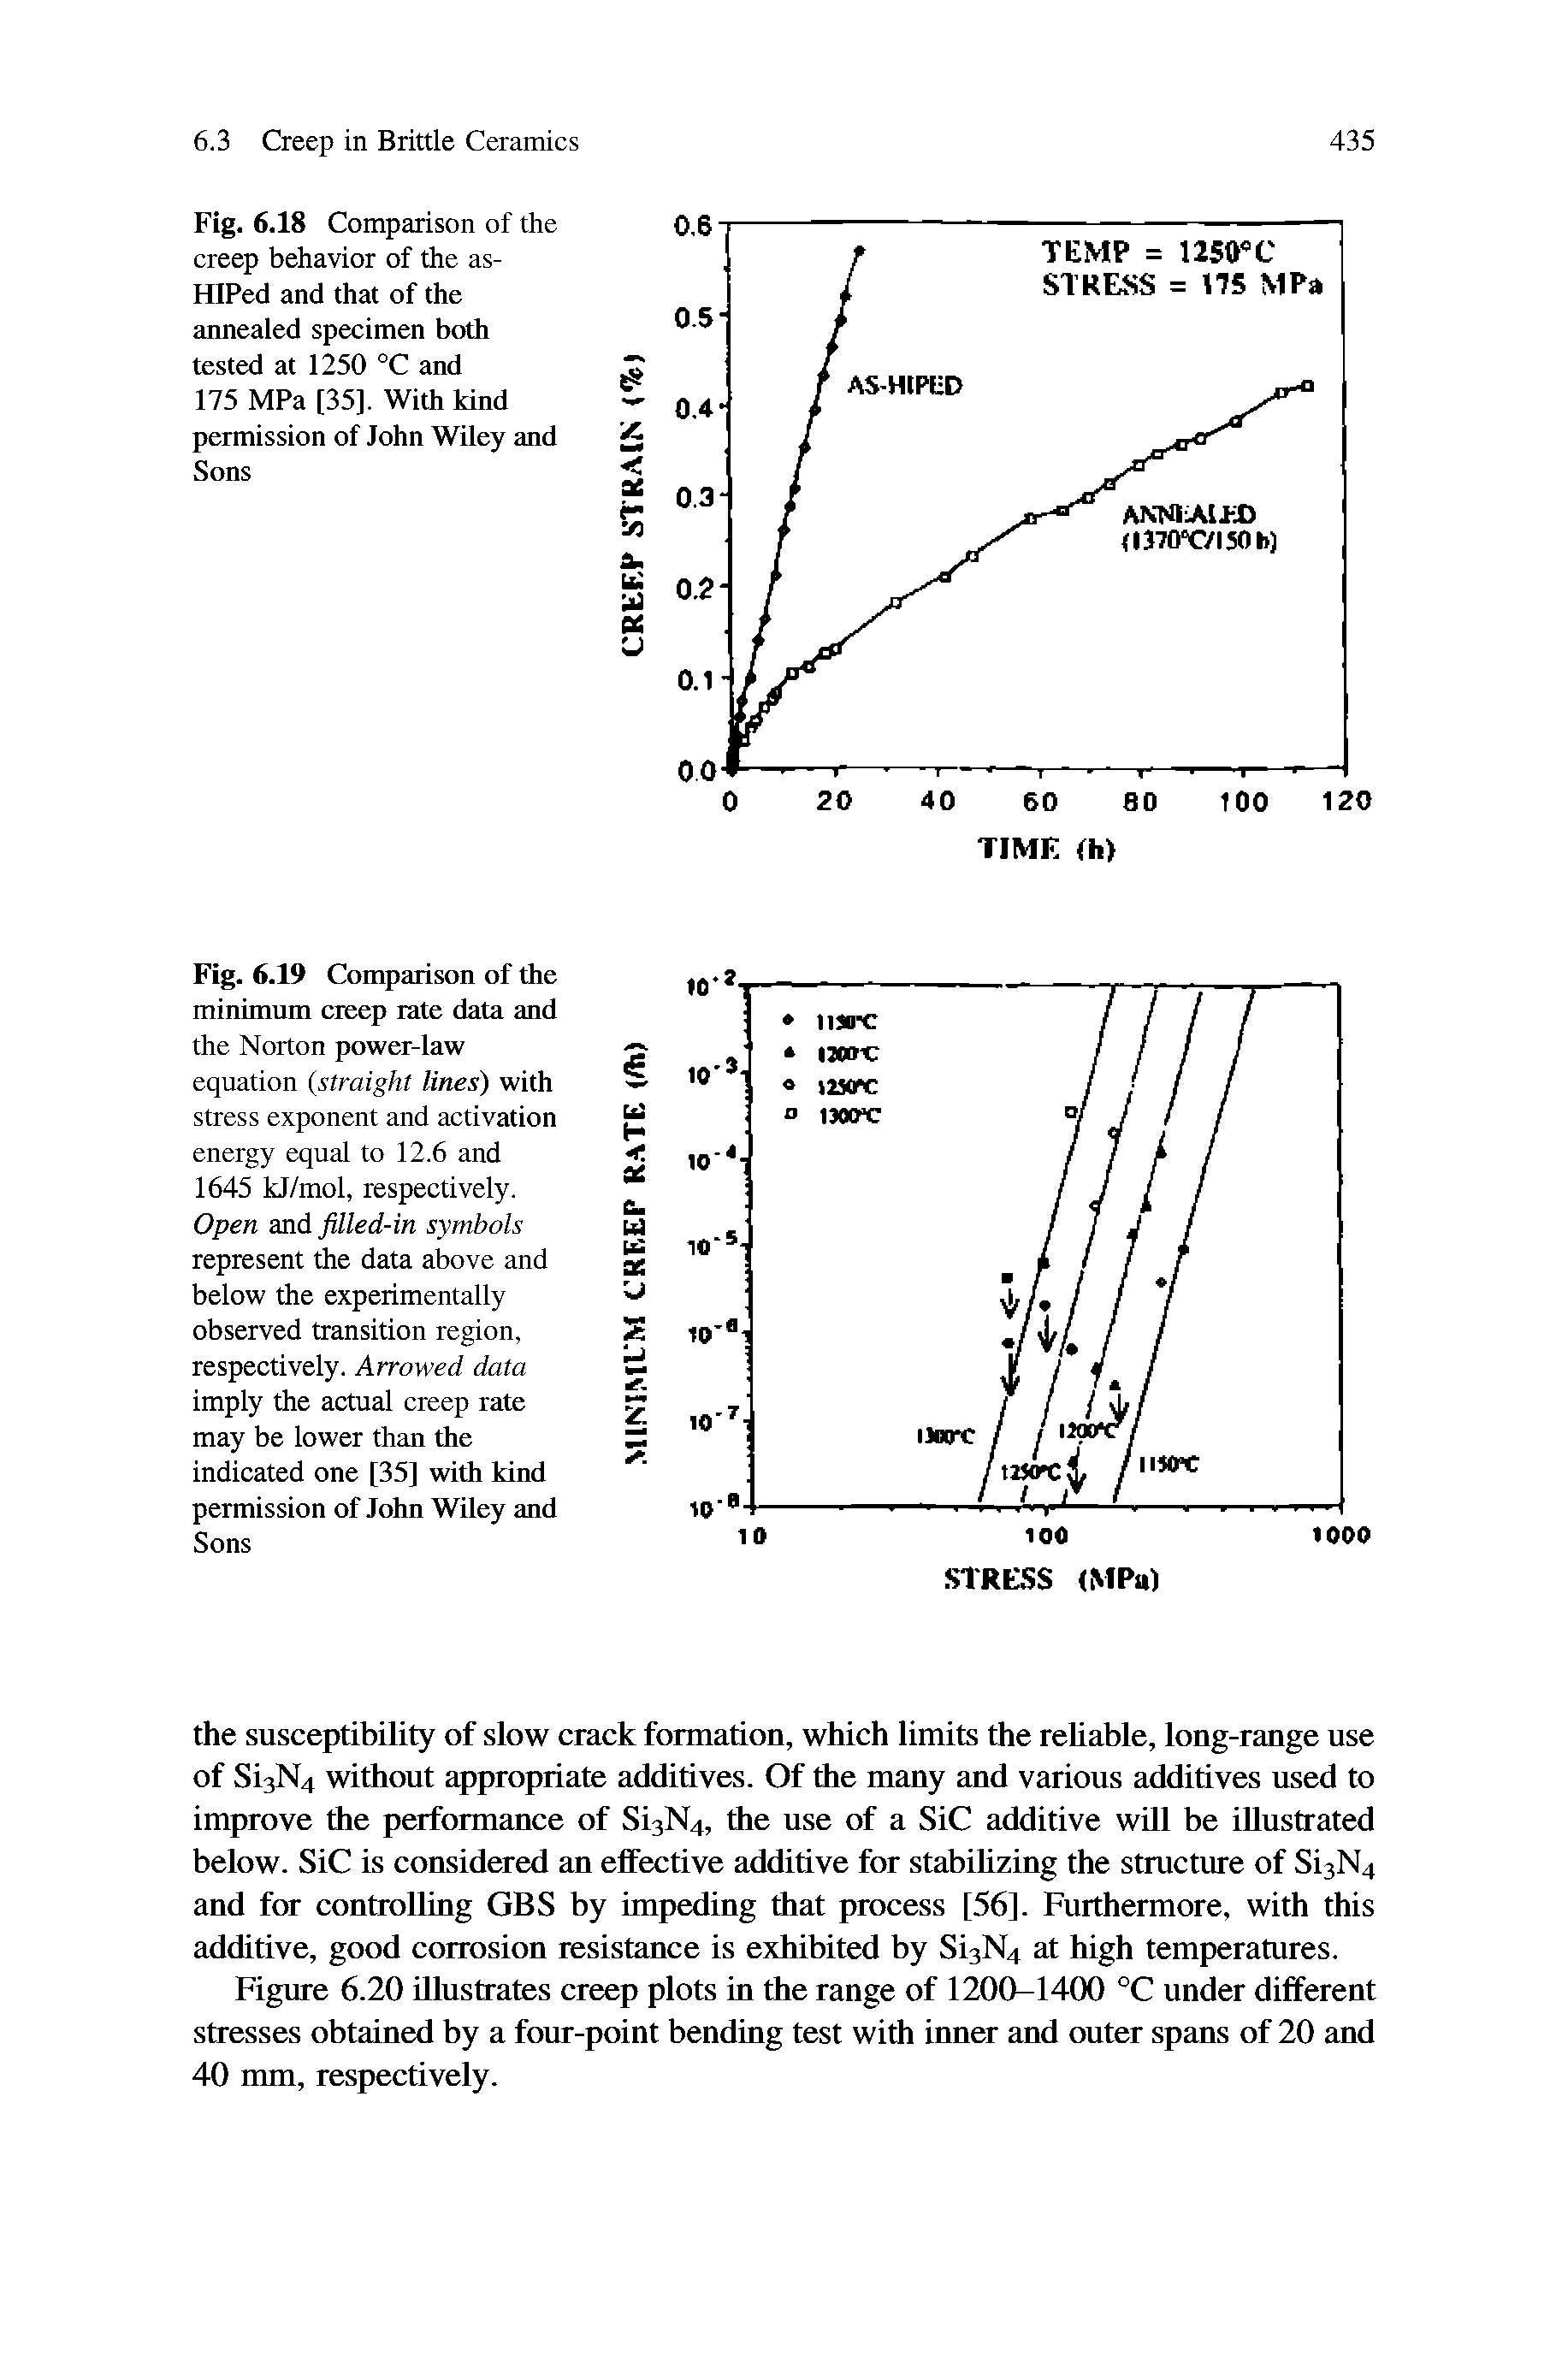 Fig. 6.19 Comparison of the minimum eieep rate data and the Norton power-law equation ( straight Unes) with stress exponent and activation energy equal to 12.6 and 1645 kJ/mol, respectively. Open and ftlled-in symbols represent the data above and below the experimentally observed transition region, respectively. Arrowed data imply the actual creep rate may be lower than the indicated one [35] with kind permission of John Wiley and Sons...